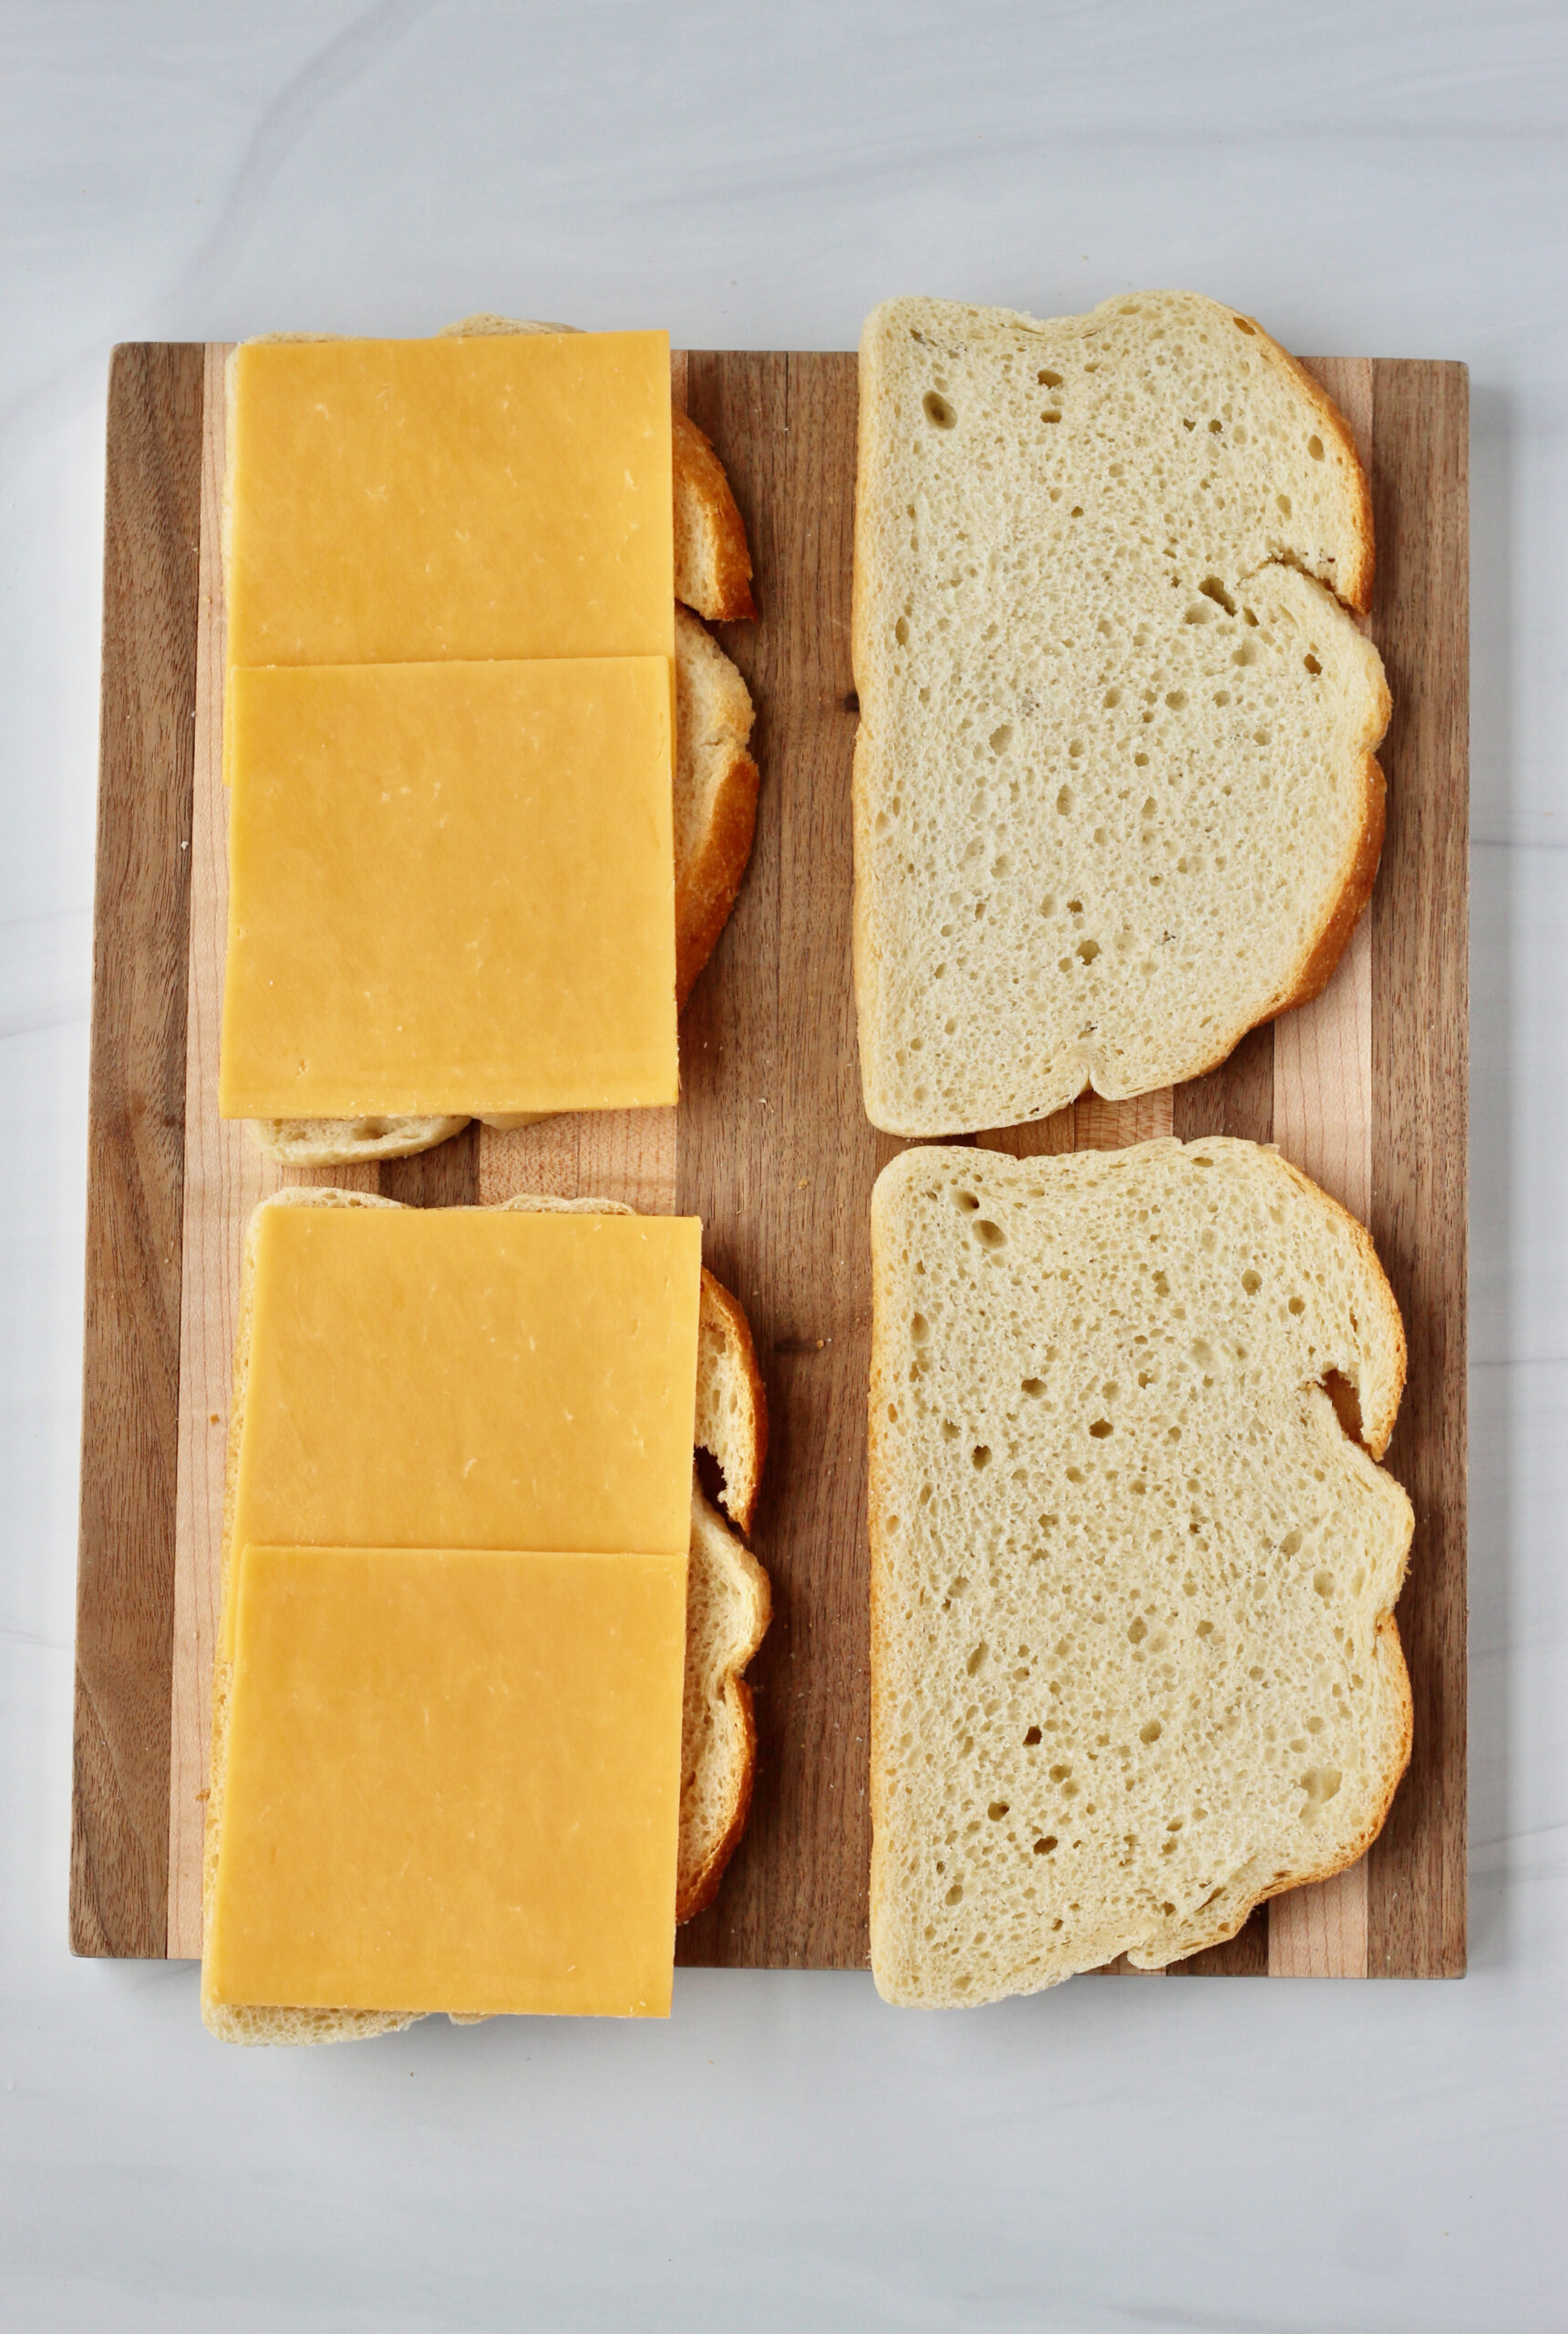 2 slices of cheese added to bread